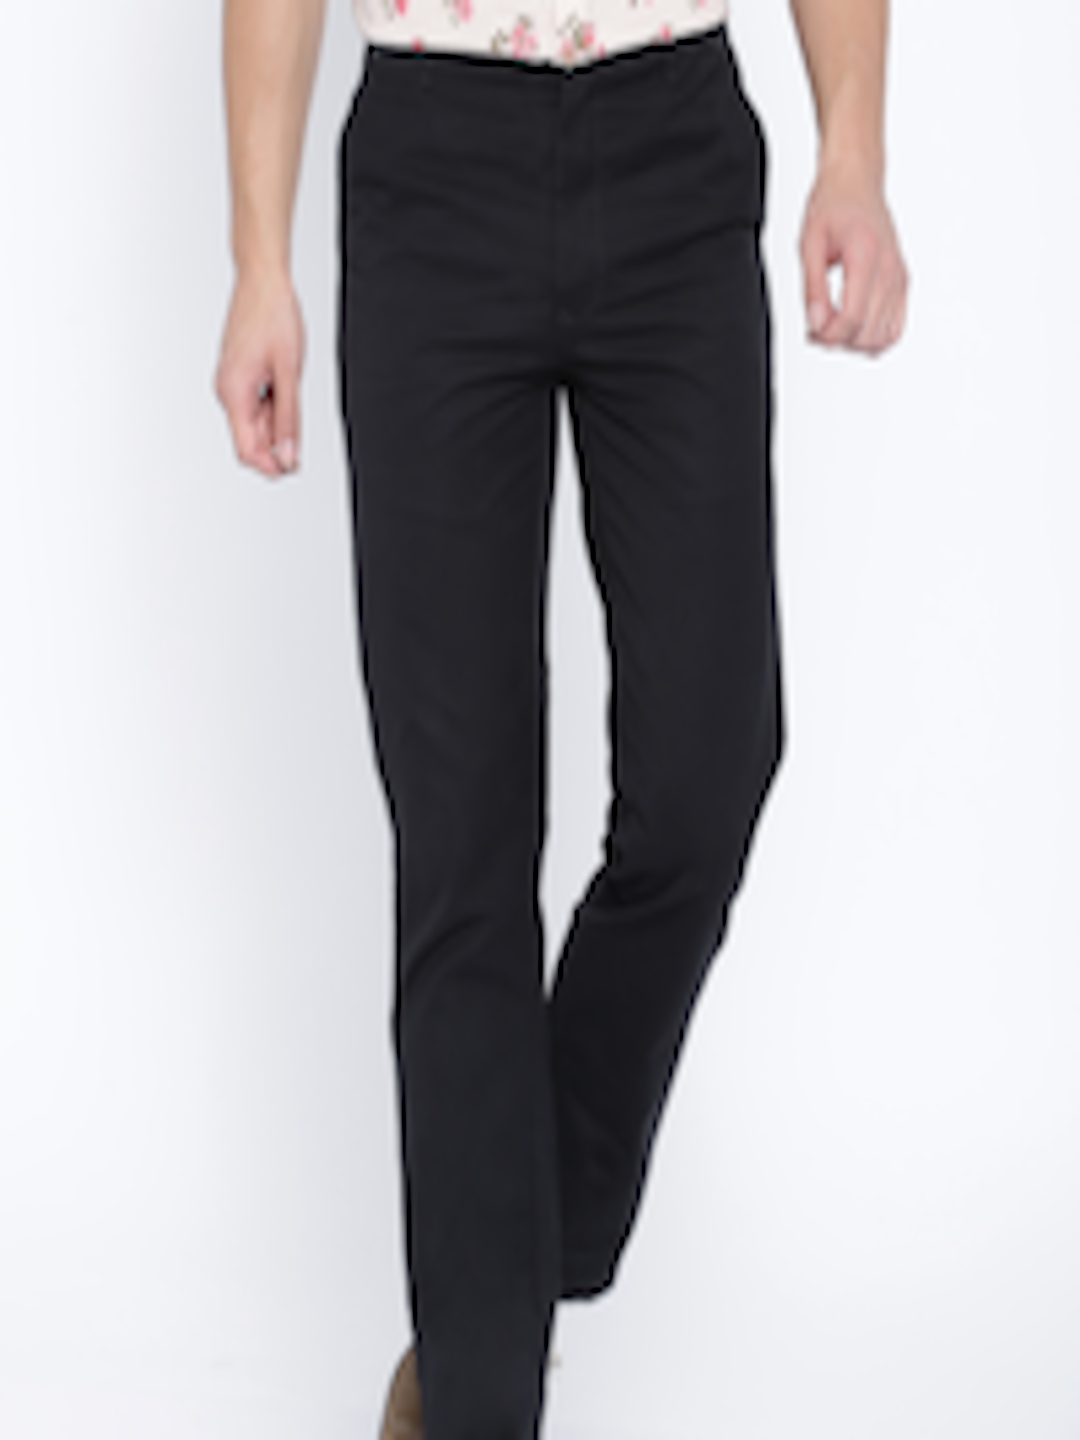 Buy Parx Black Slim Fit Casual Trousers - Trousers for Men 1186979 | Myntra